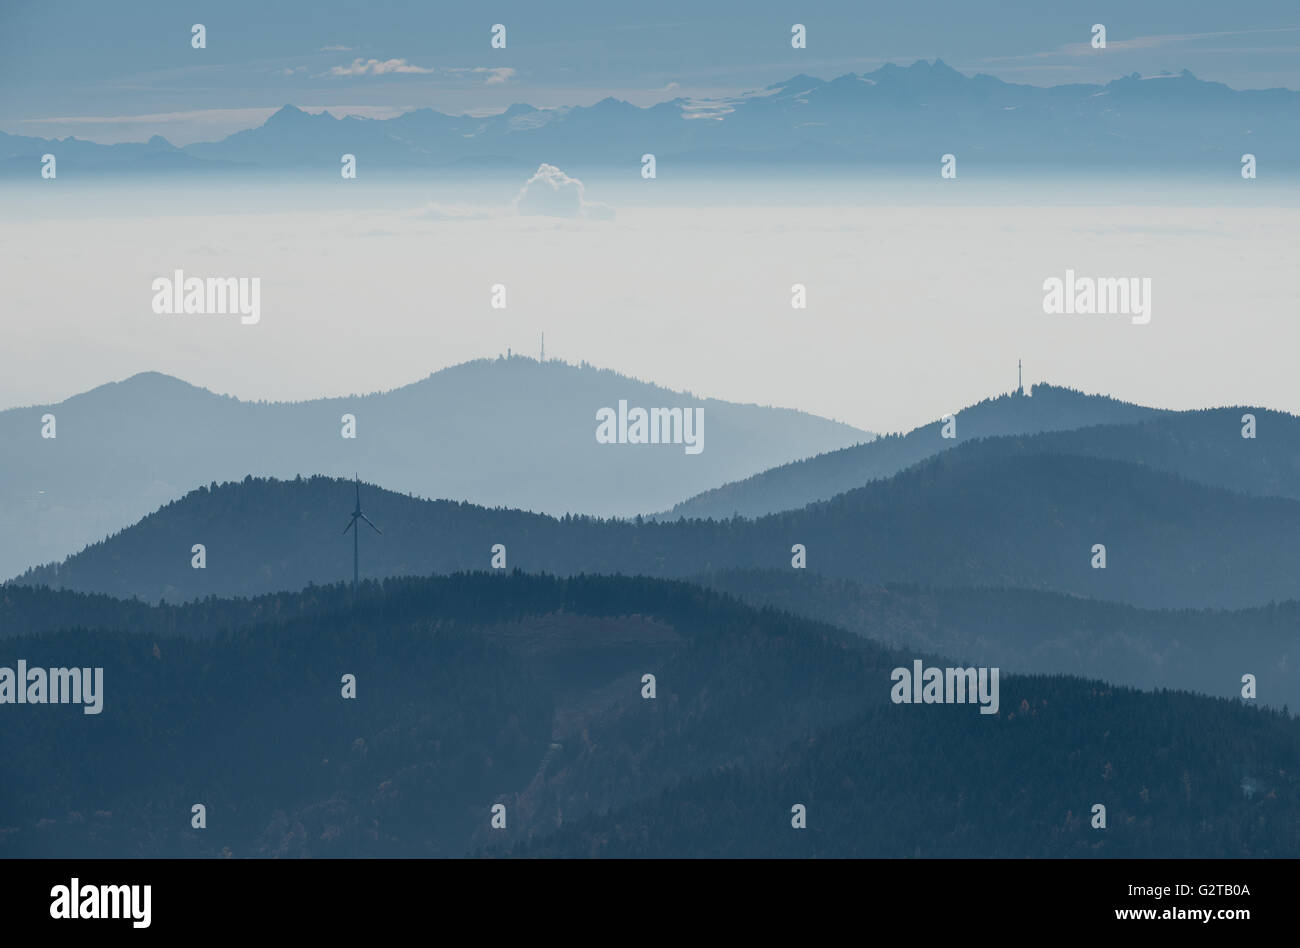 27.10.2015, Schoenau im Schwarzwald, Baden-Wuerttemberg, Germany - View from Belchen towards the Swiss Alps. 00K151029D476CAROEX.JPG - NOT for SALE in G E R M A N Y, A U S T R I A, S W I T Z E R L A N D [MODEL RELEASE: NOT APPLICABLE, PROPERTY RELEASE: NO, (c) caro photo agency / Kaiser, http://www.caro-images.com, info@carofoto.pl - Any use of this picture is subject to royalty!] Stock Photo